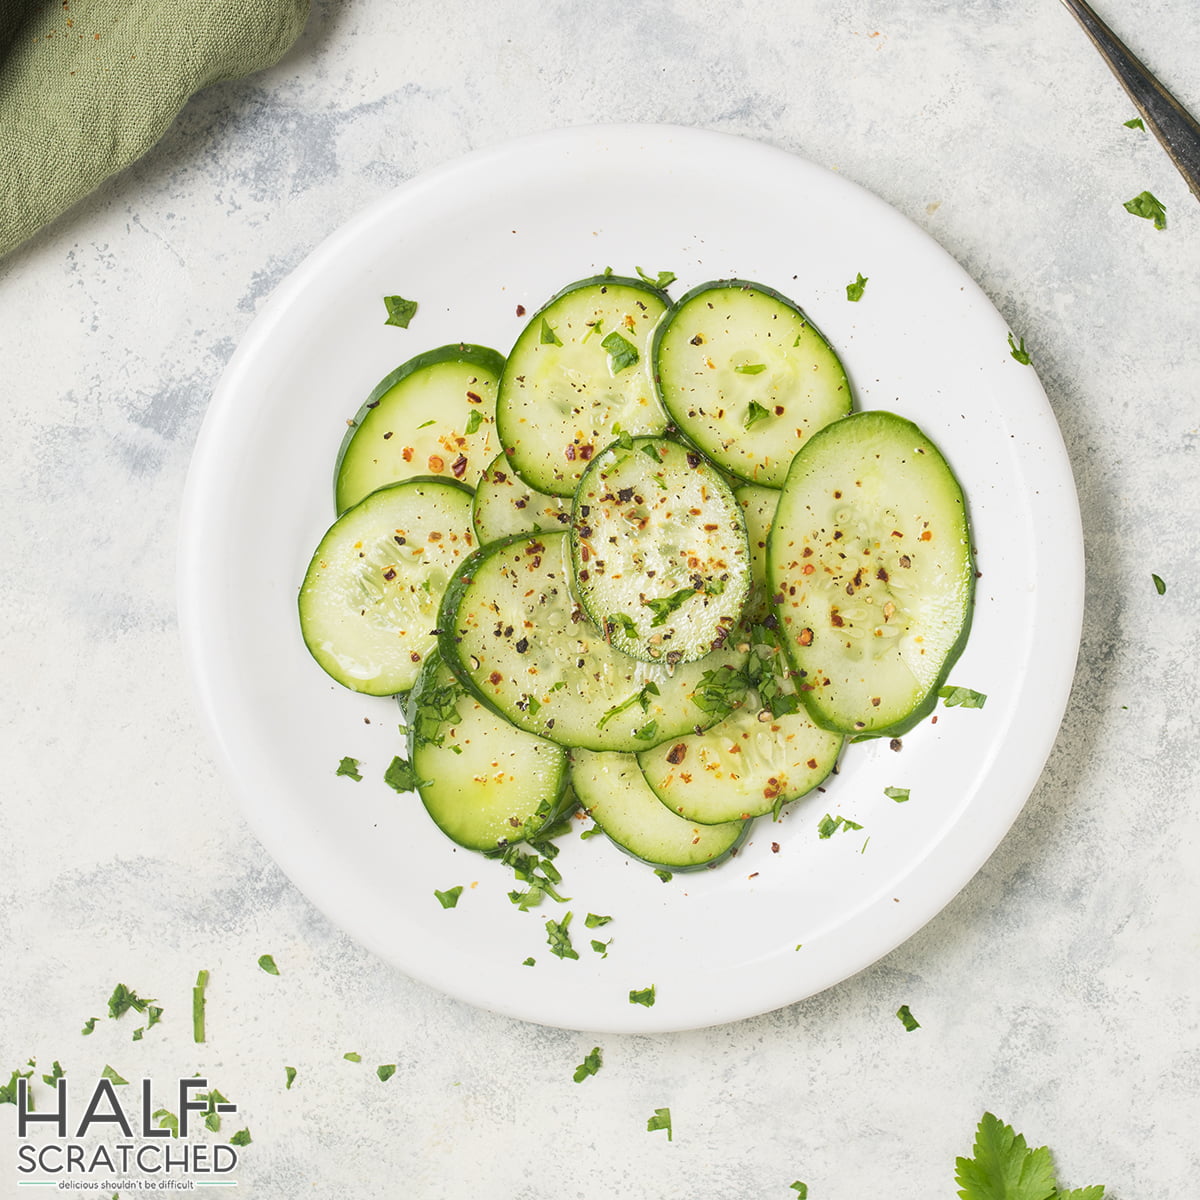 How To Make Cucumber Salad With Vinegar And Sugar